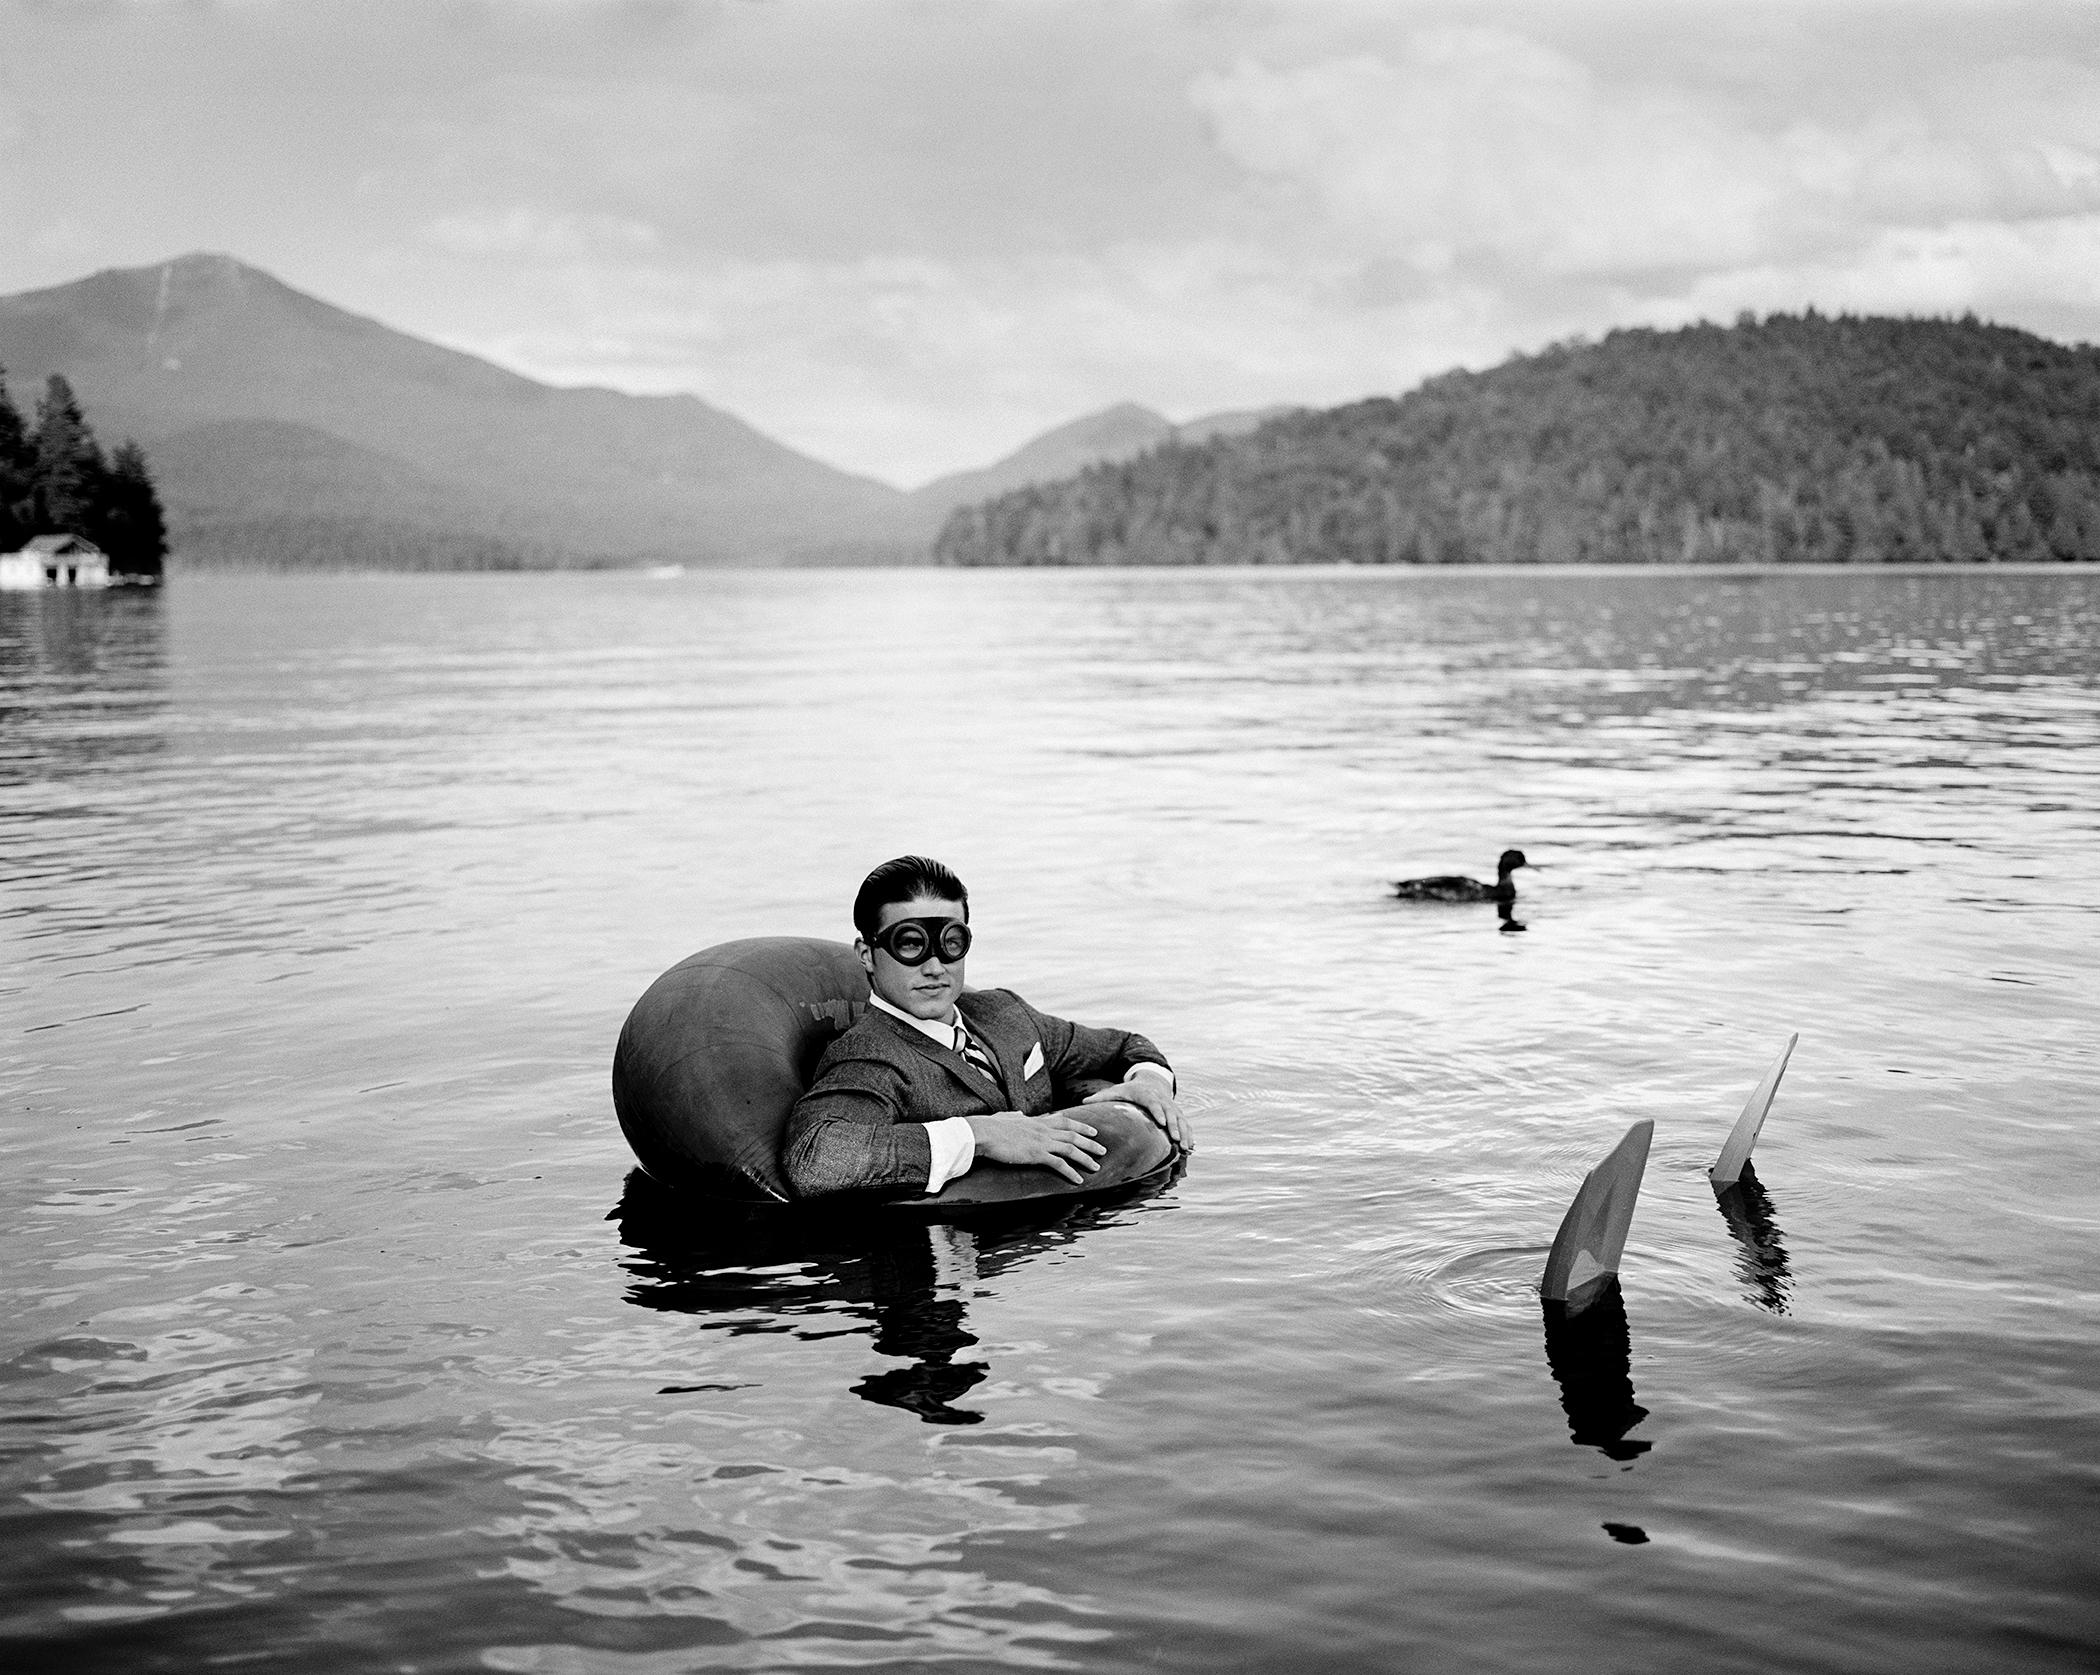 Rodney Smith Black and White Photograph - James in Innertube with Duck, Lake Placid, New York - 20 x 25 inches